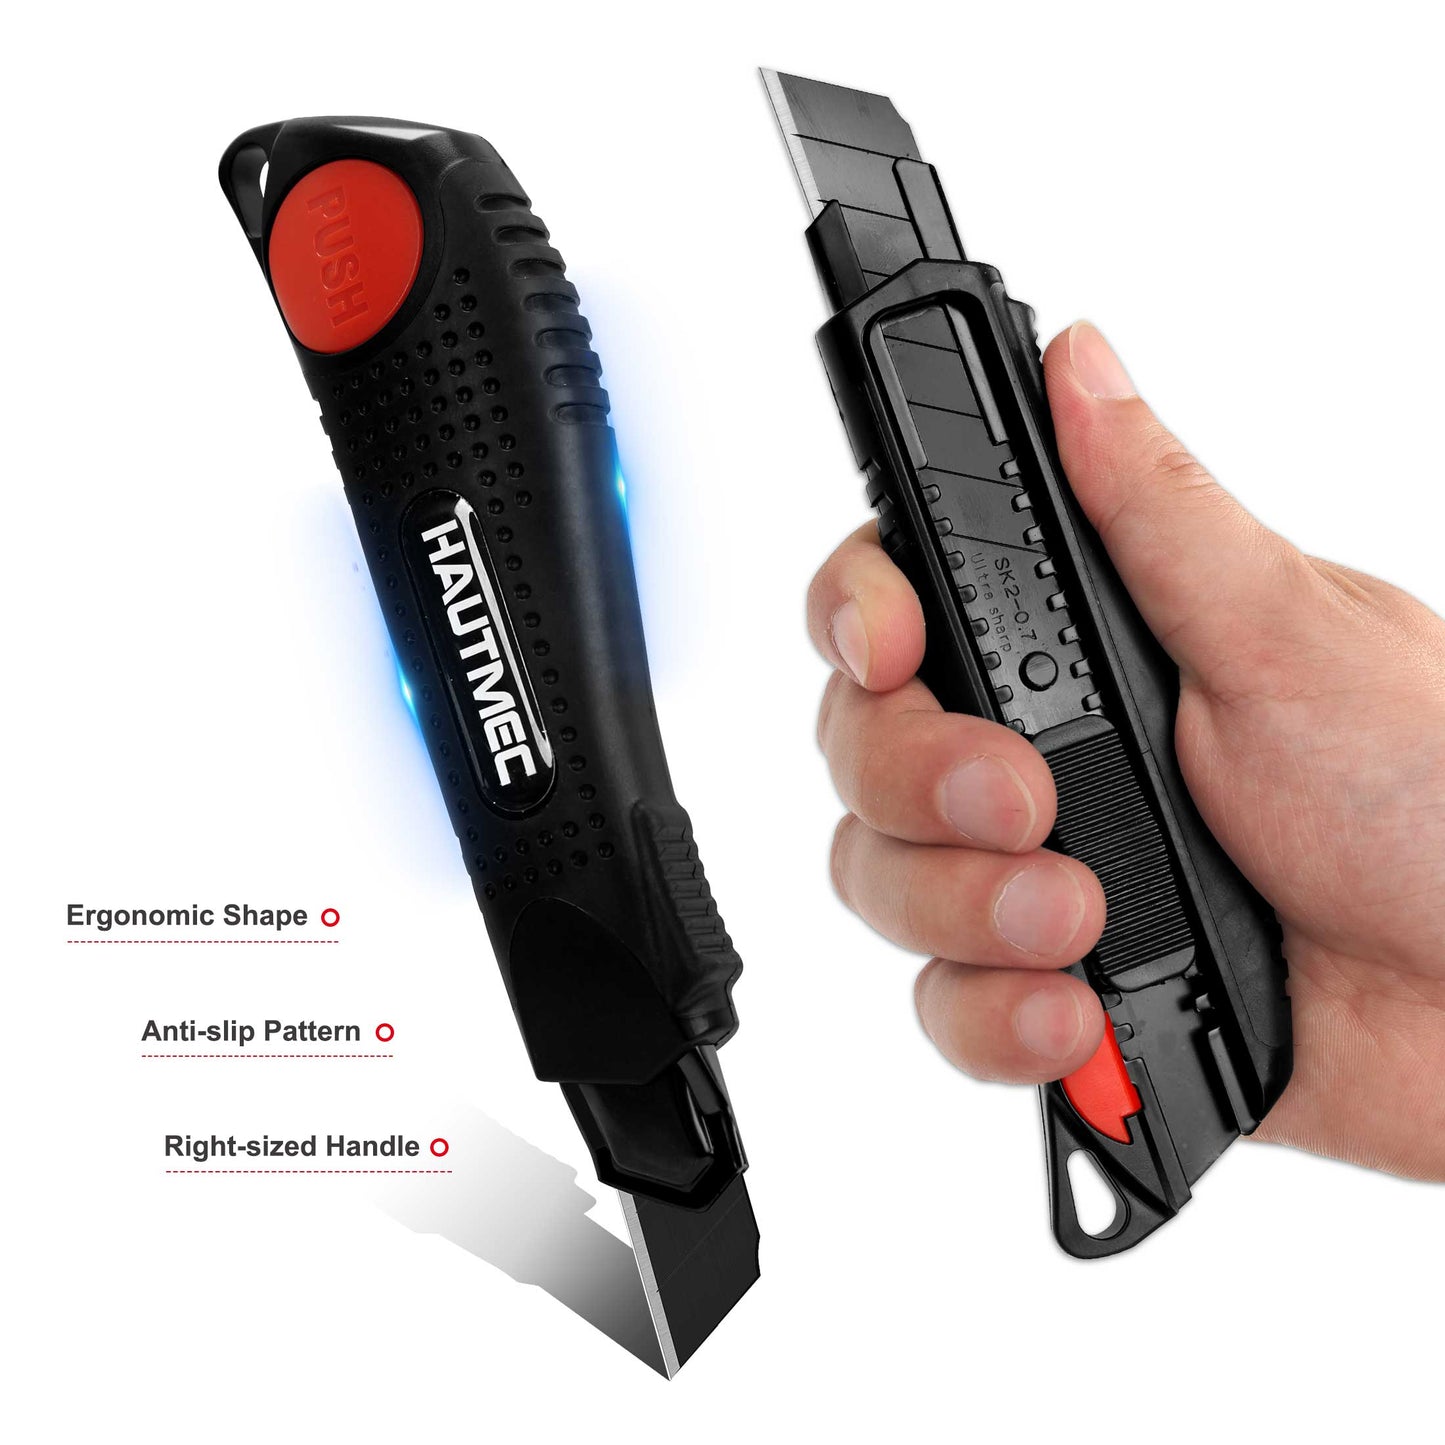 HAUTMEC 18mm Utility Knife Box Cutter with Safety Quick Change Button, Snap off Black SK2 Ultra Sharp Blade, Anti-Slip Ergonomic Rubber Handle for Leather, Rubber, Cartons, Boxes HT0081-KN